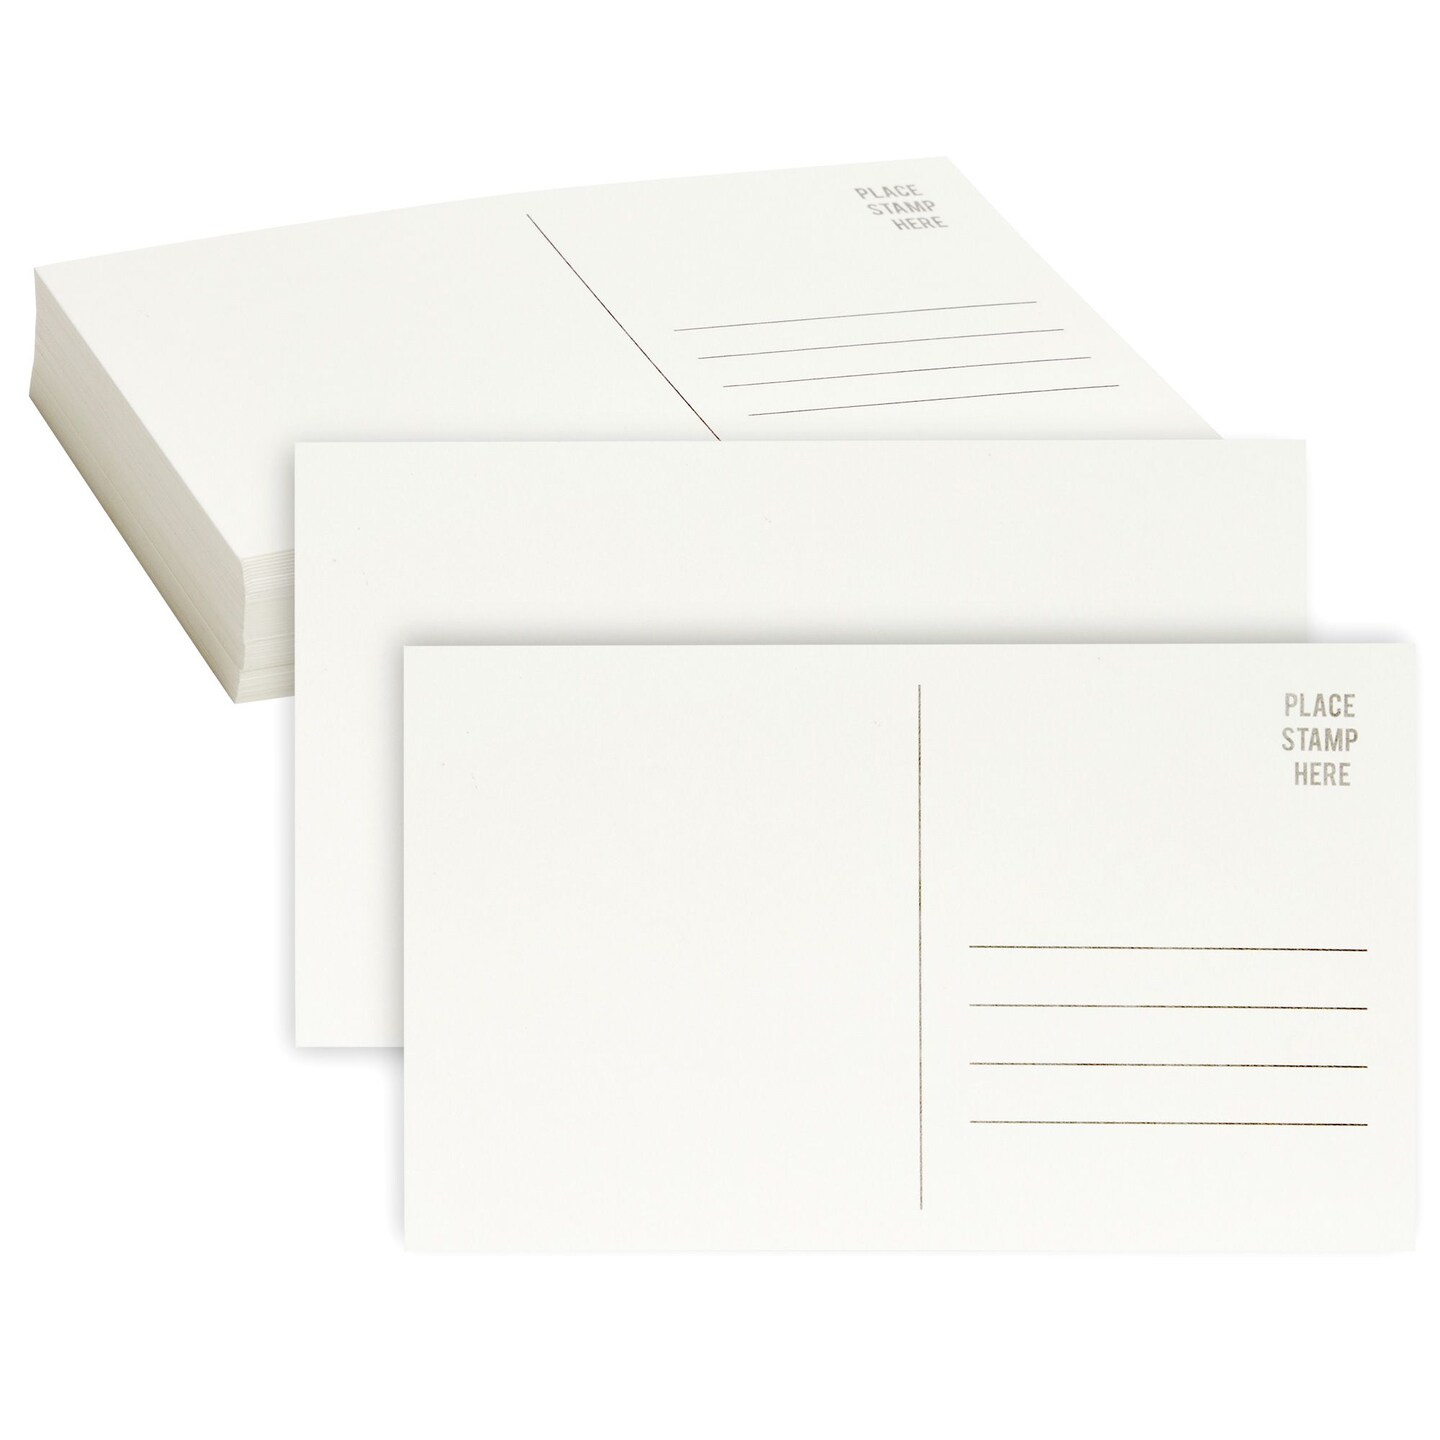 48 Pack Bulk Welcome Note Cards with Envelopes for Guests, Employees,  Business, Floral Design, Blank Interior (4x6 In)